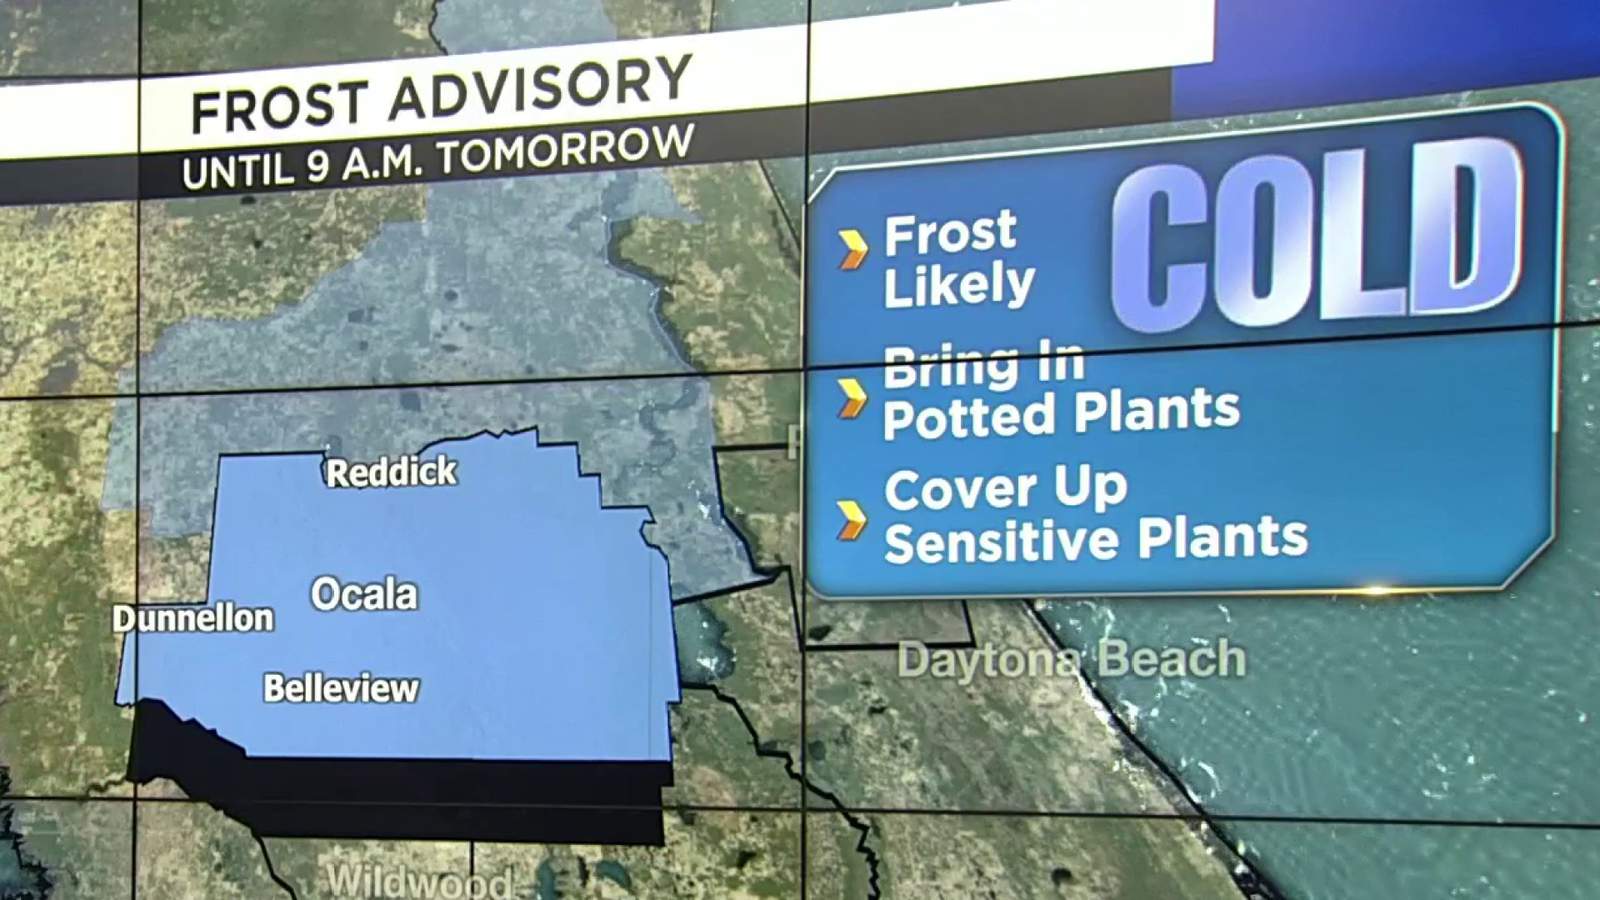 Cold shelter to open in Ocala as frost advisory issued in Marion County